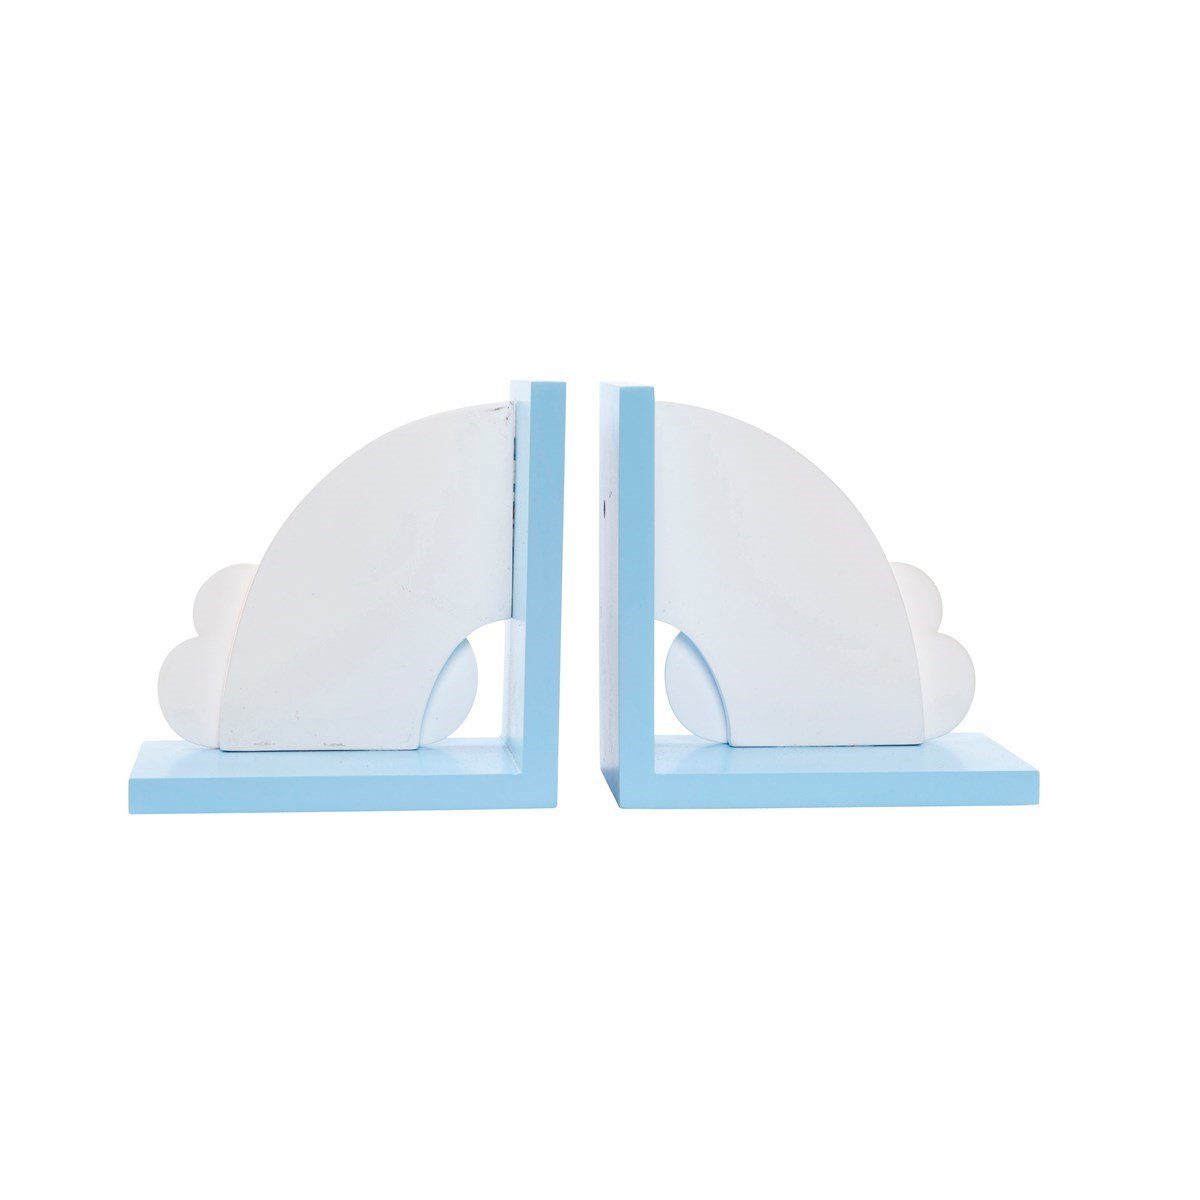 'Day Dreams' Rainbow and Clouds Bookends